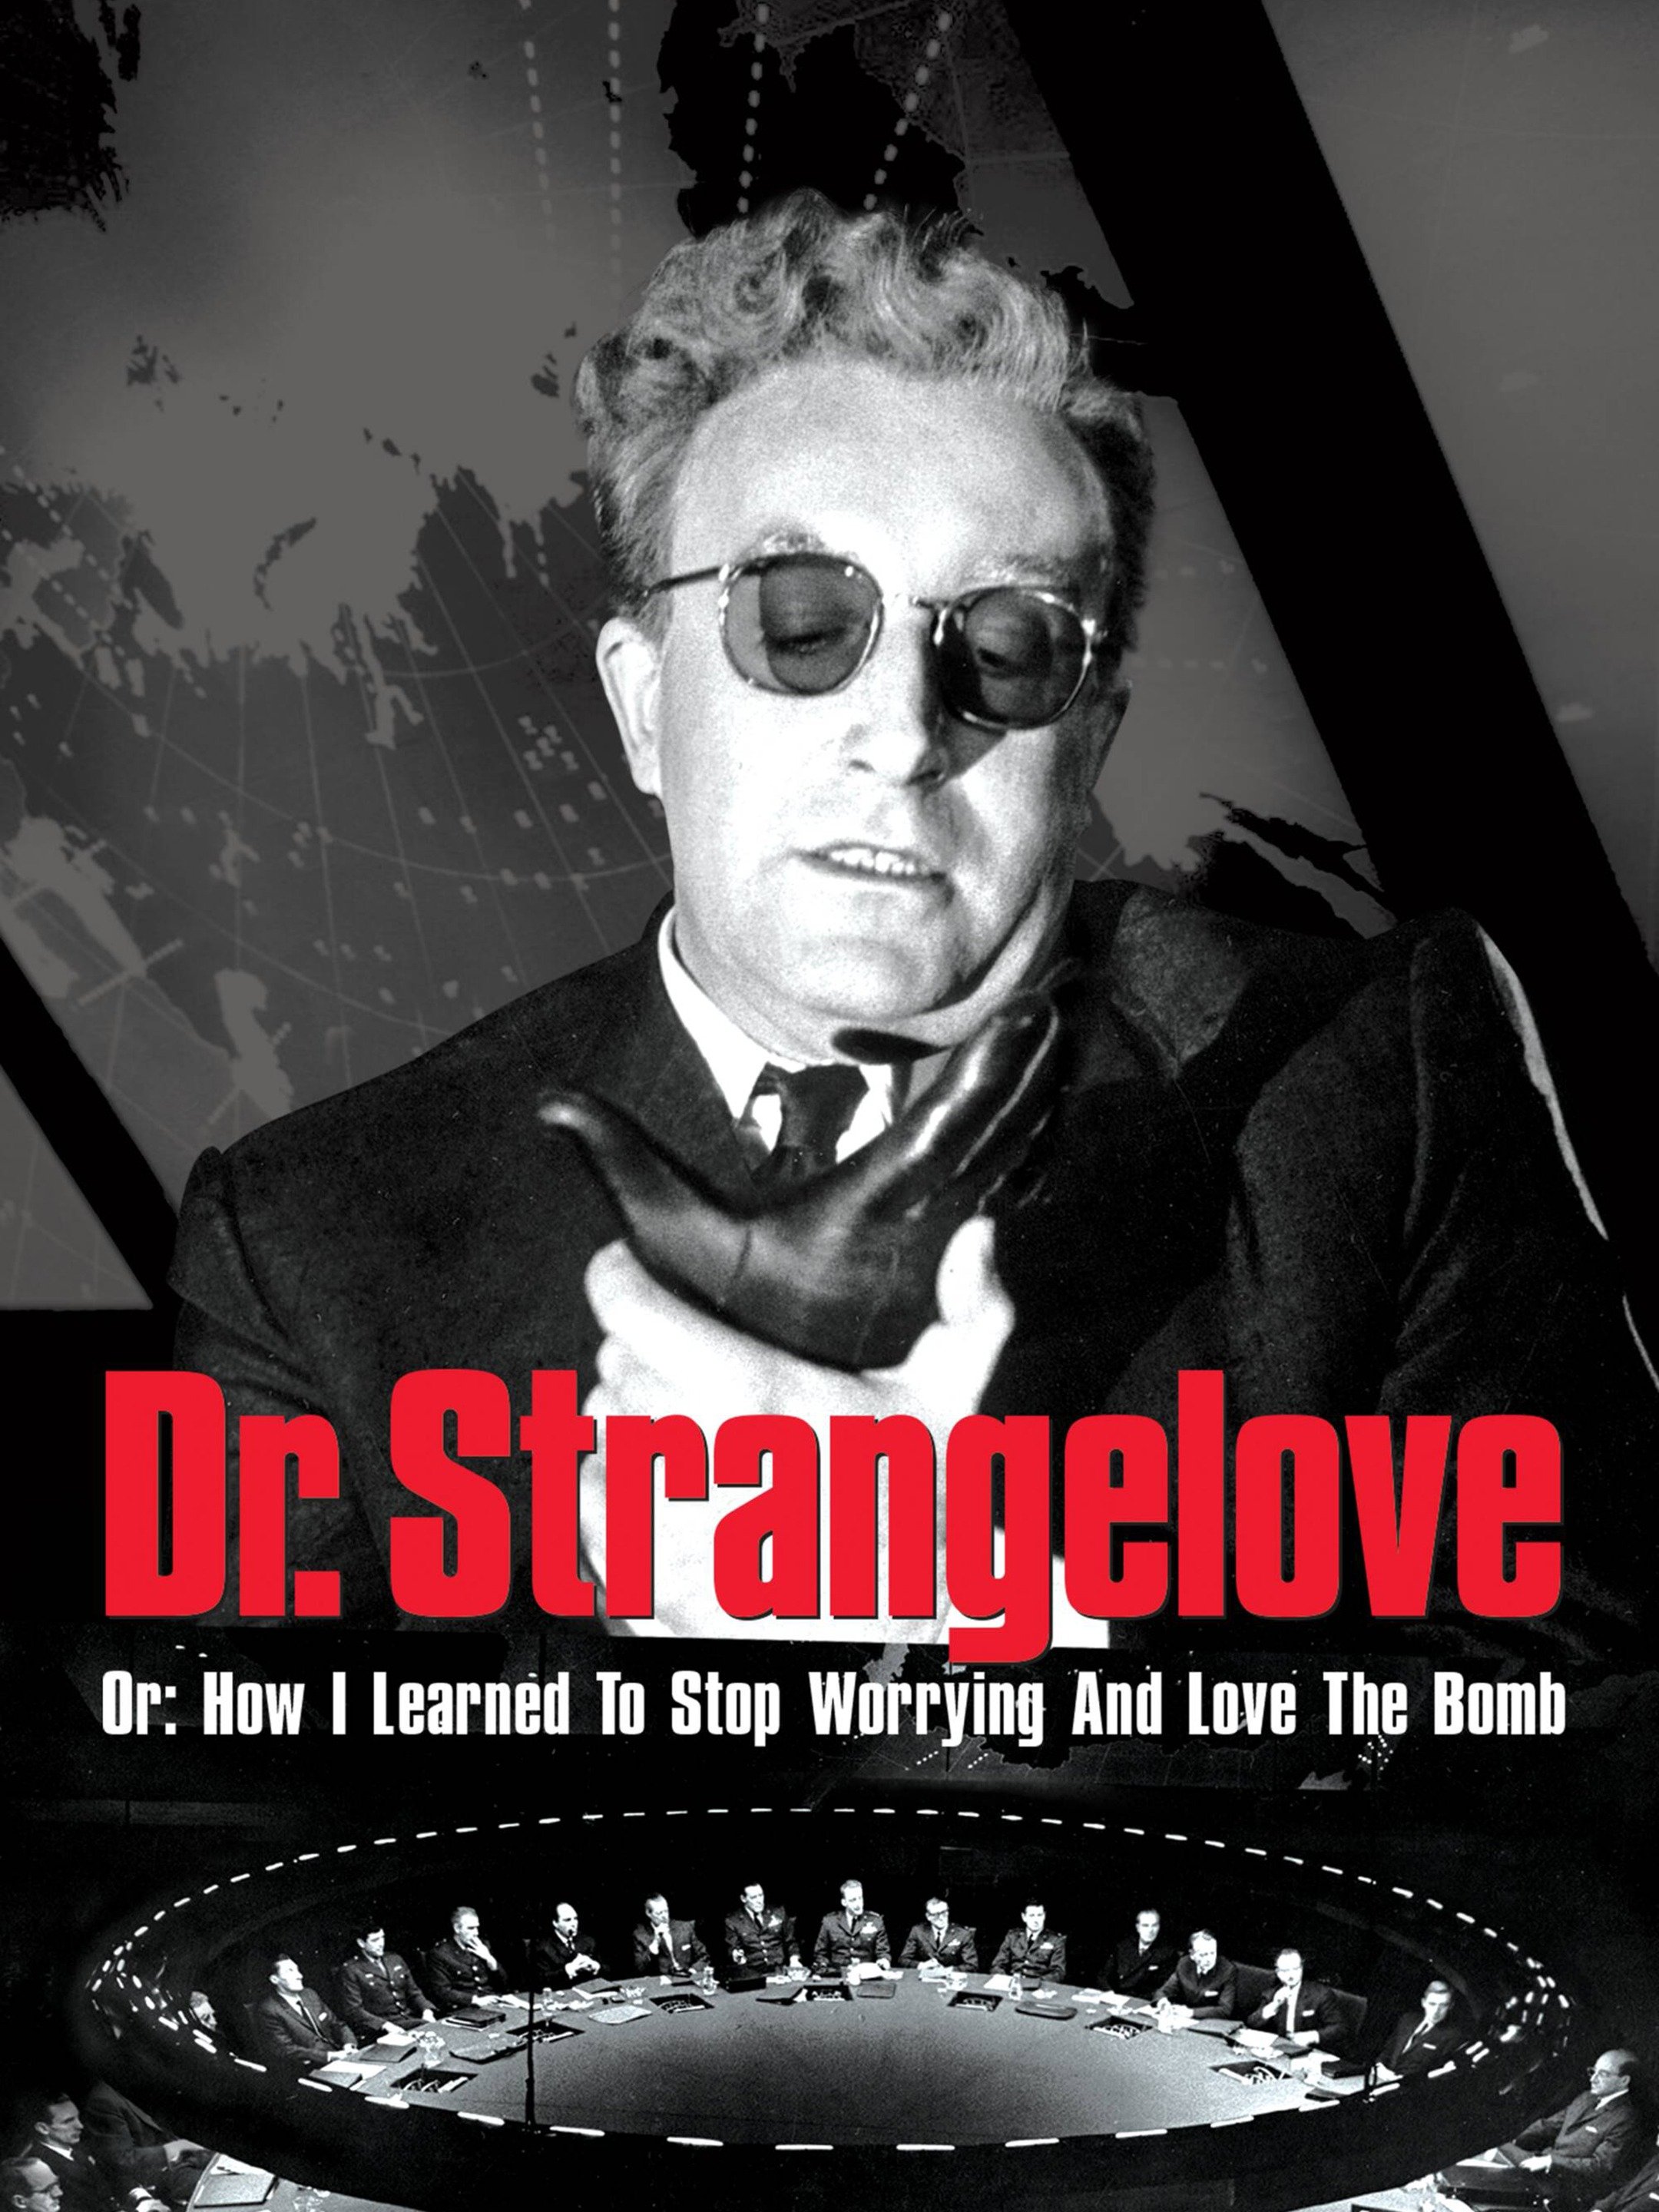 "Dr. Strangelove Or: How I Learned to Stop Worrying and Love the Bomb photo 14"